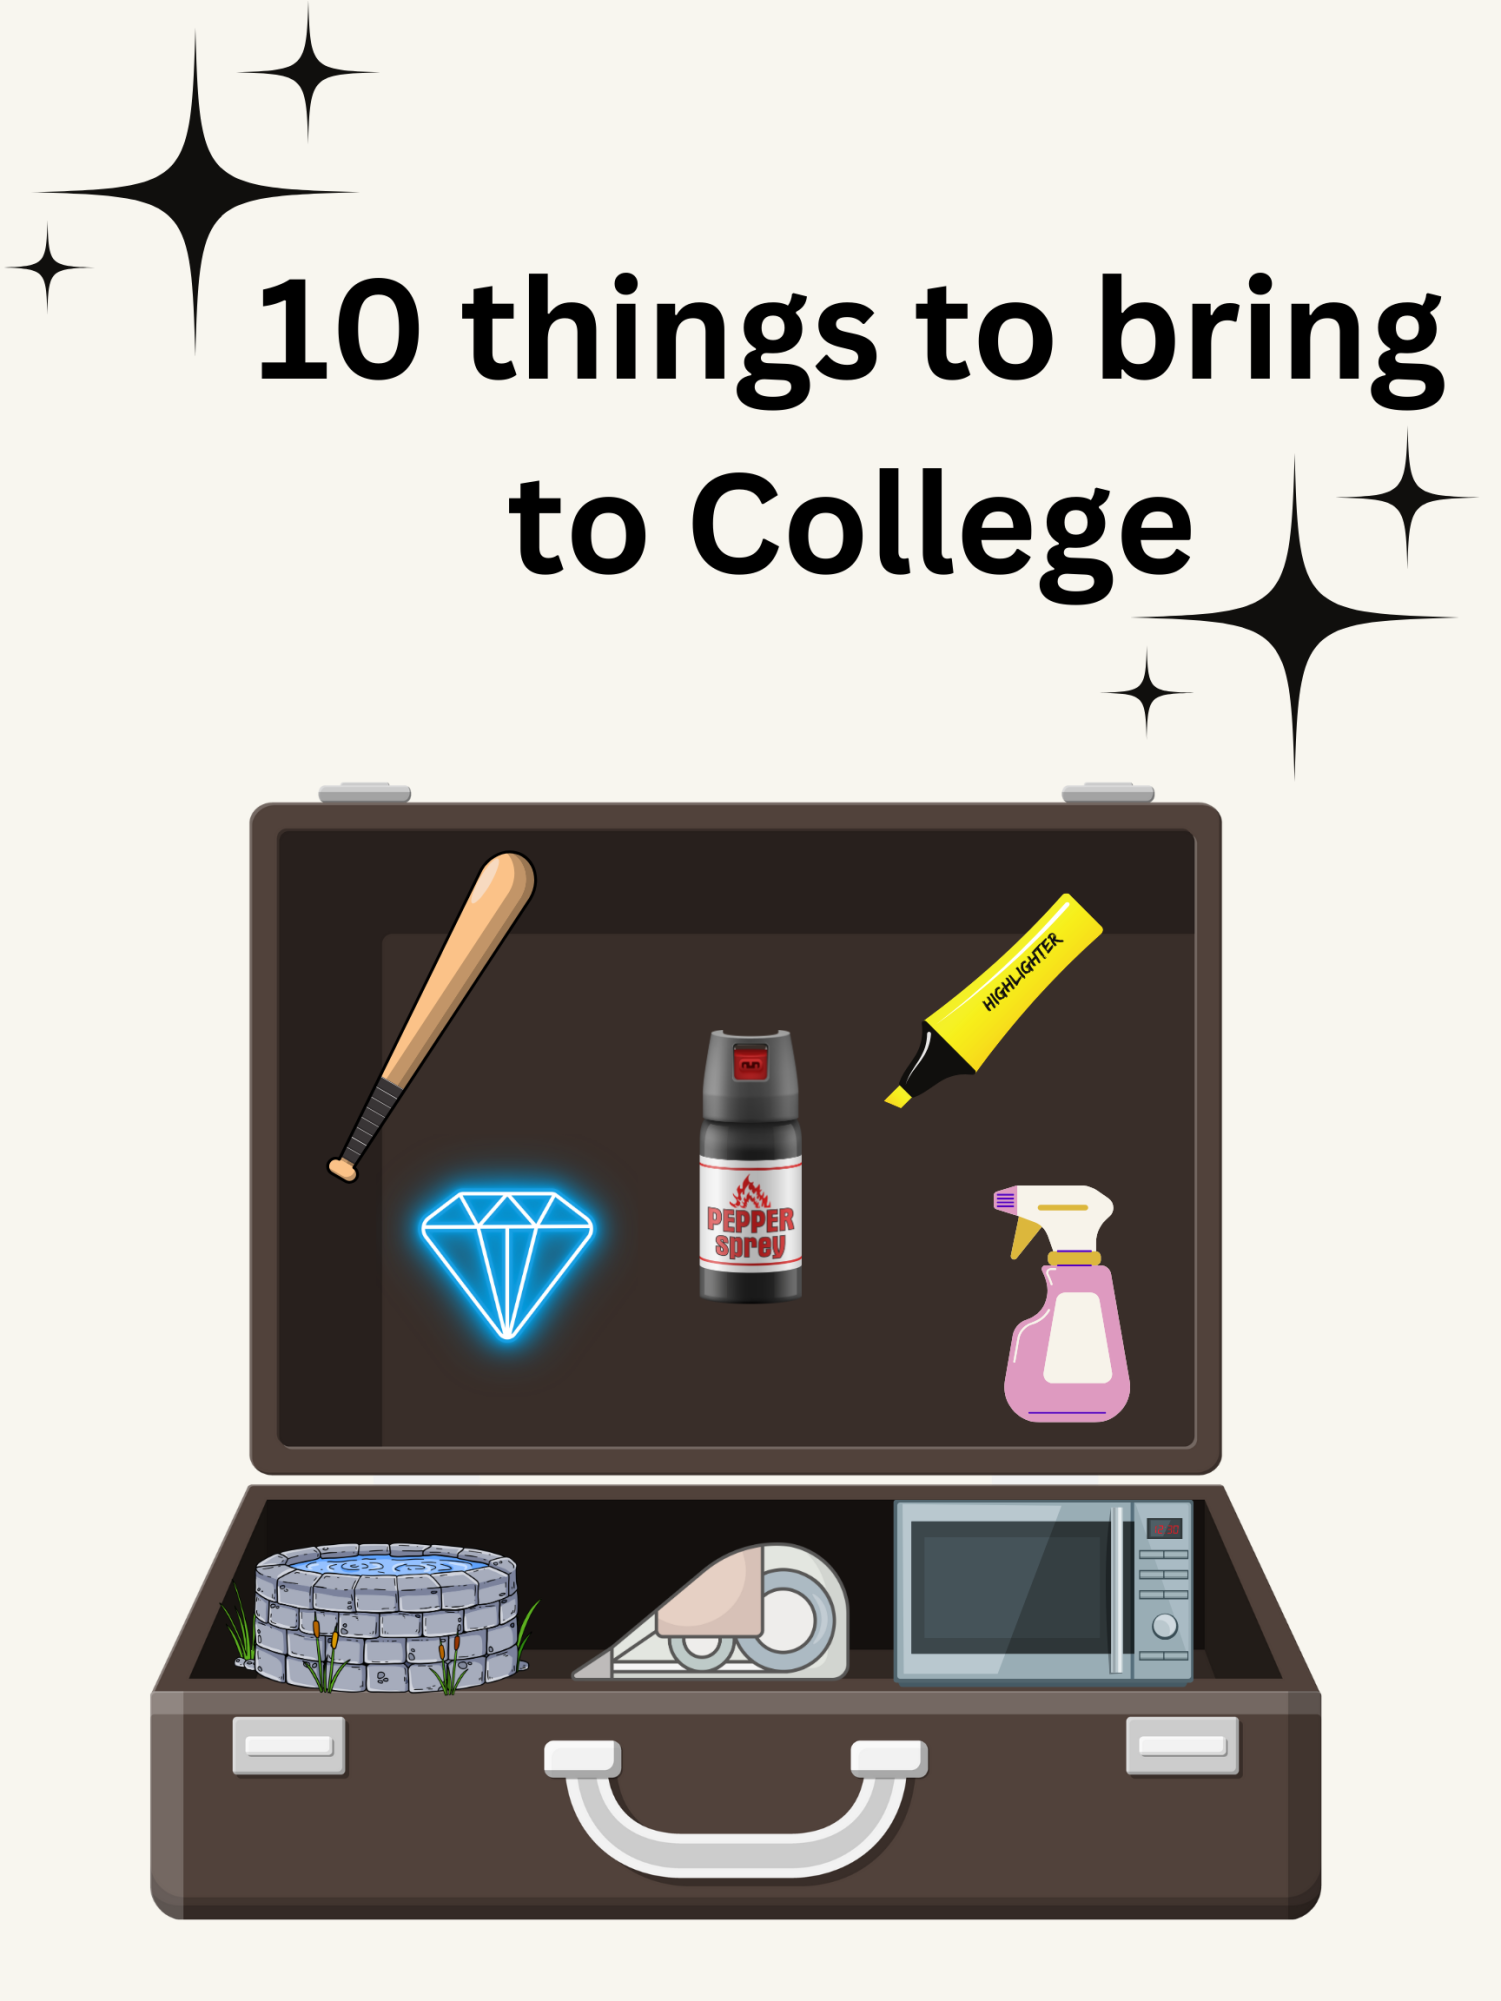 A poster depicting all the things one should take to college